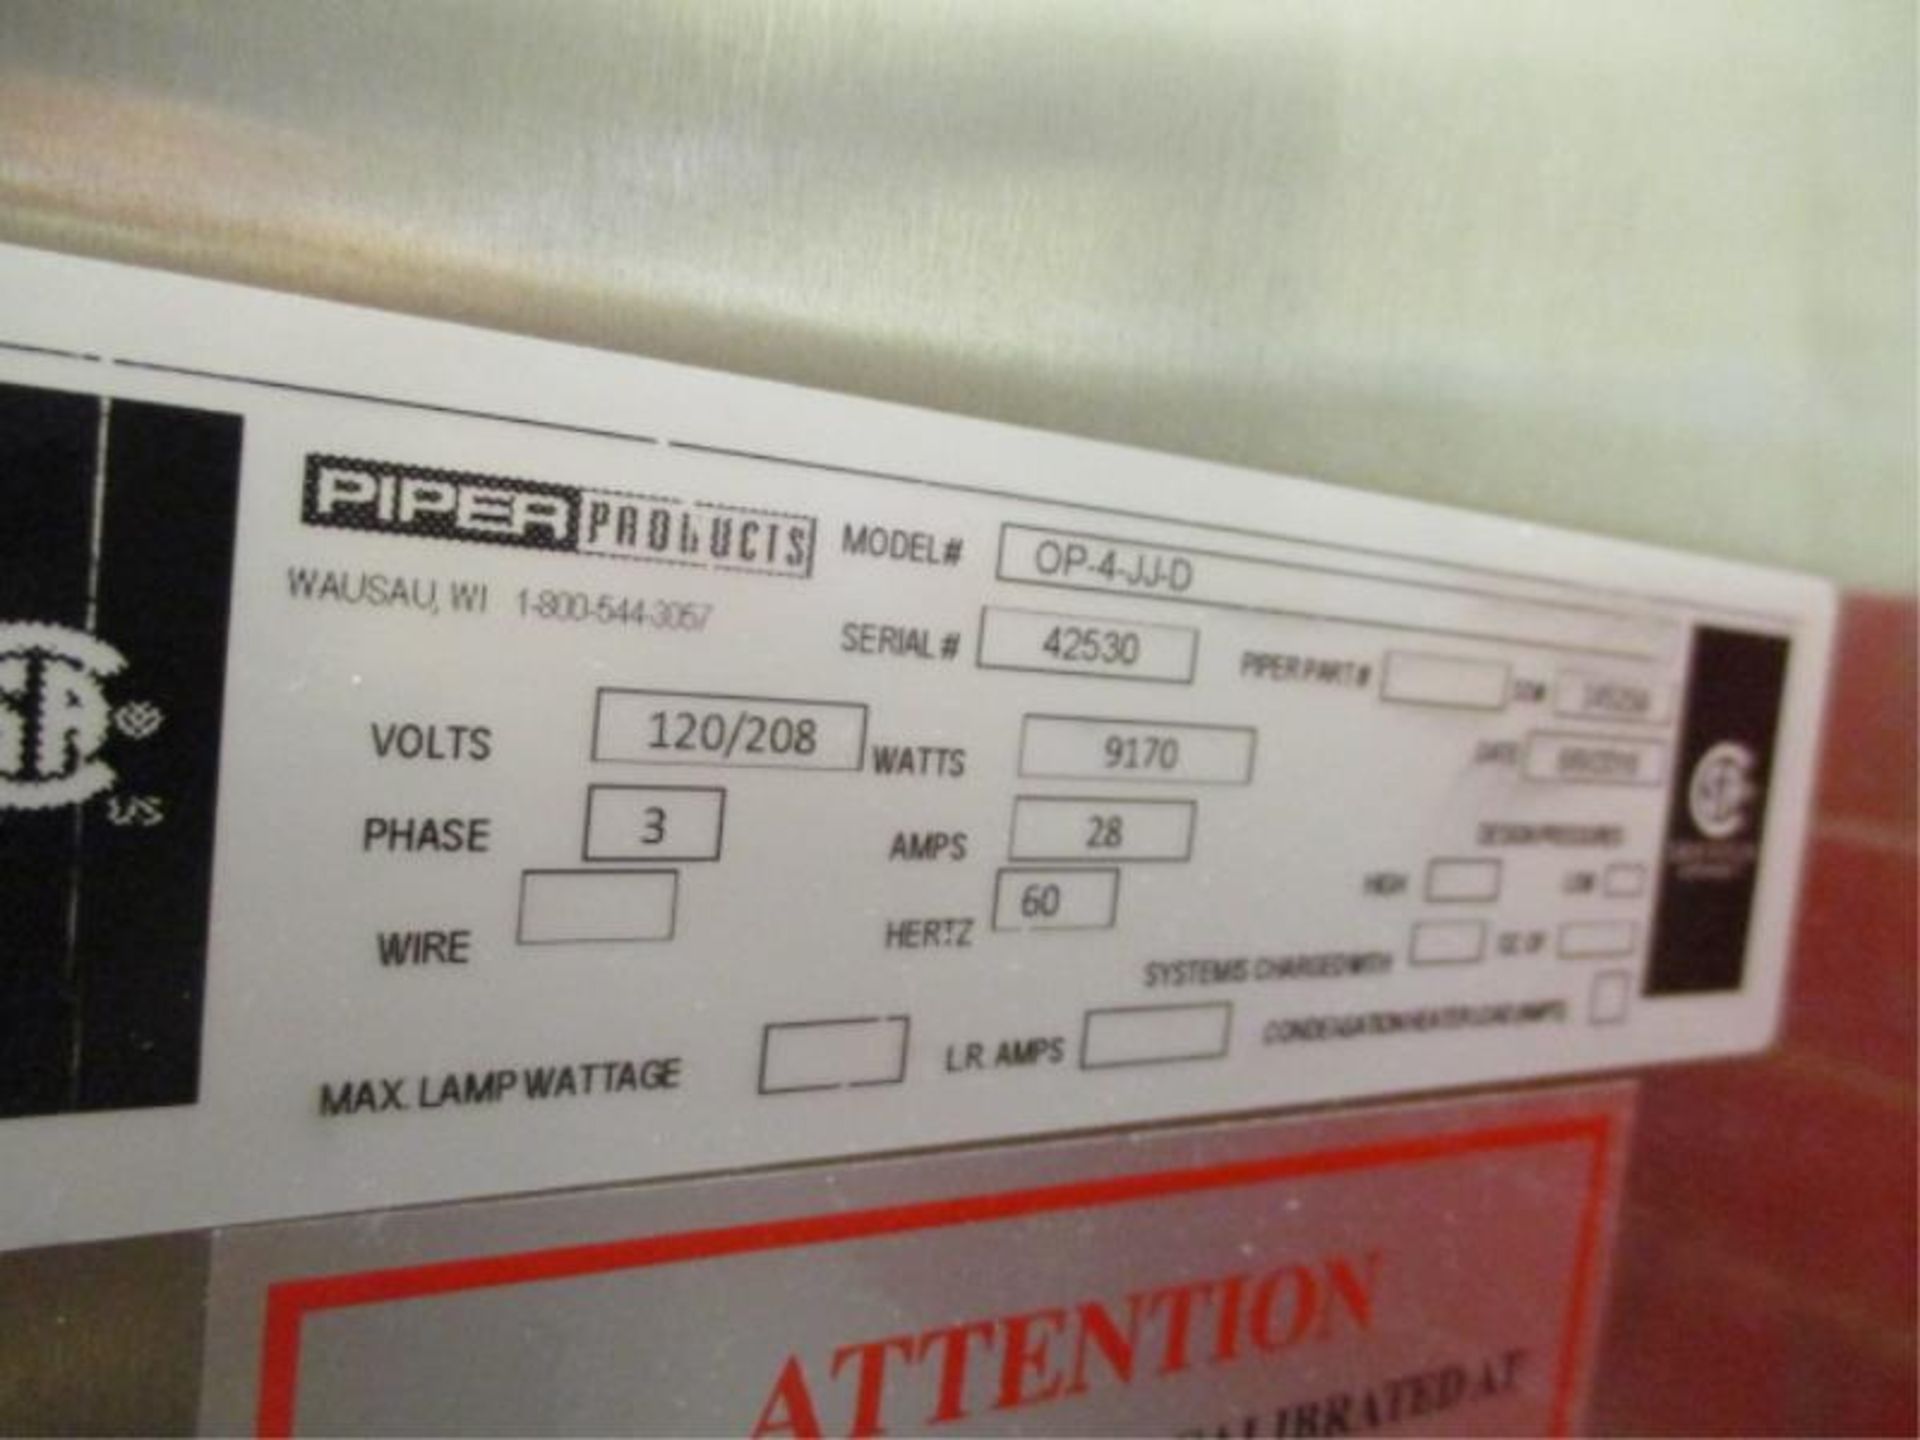 Piper Products Proofer/Oven Model Op-4-JJ-D, Serial # 42530, 120/208 volts, 3 phase, Made 6/9/2016 - Image 4 of 10